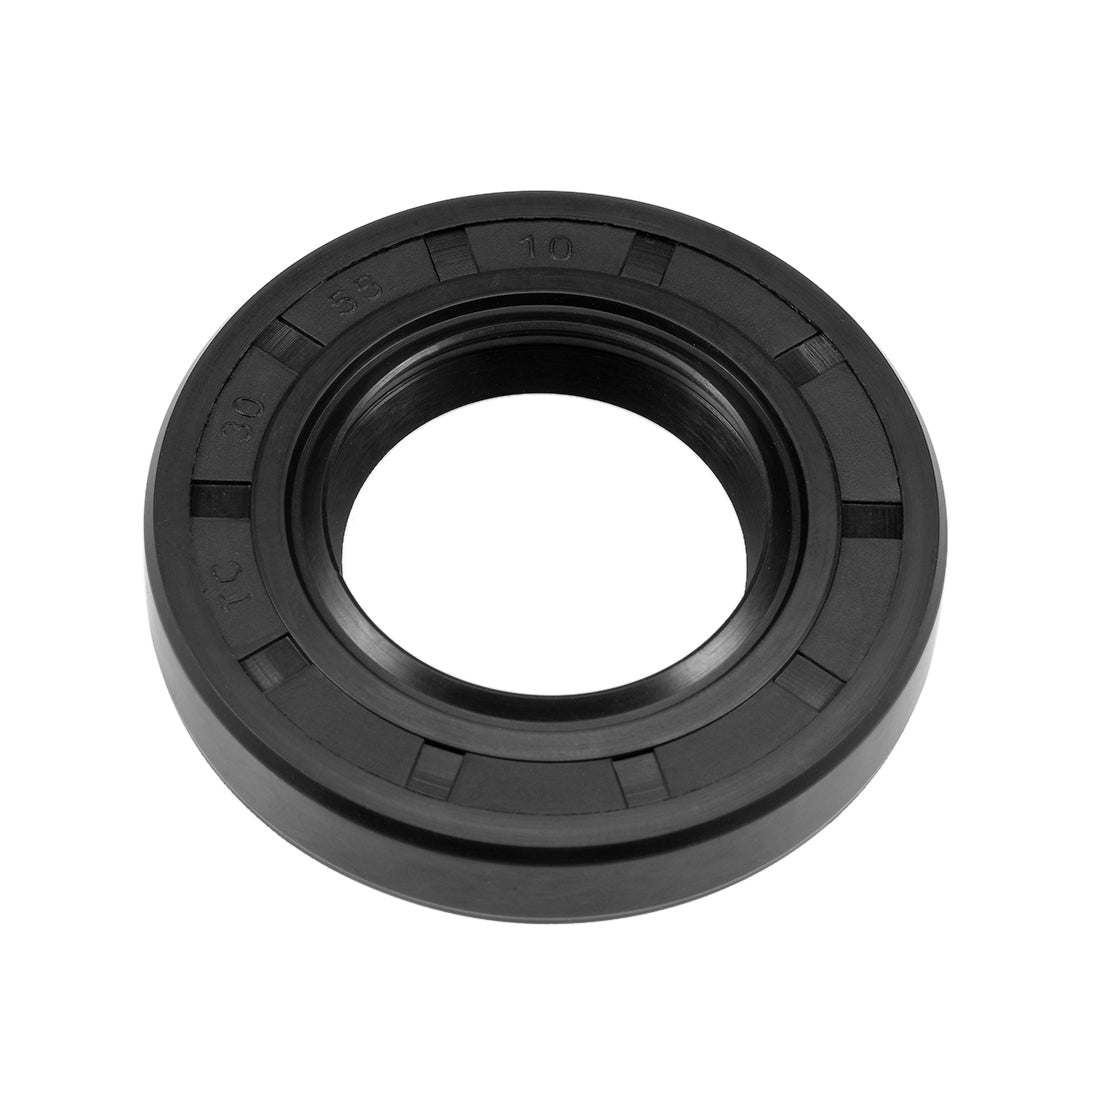 Uxcell Uxcell Oil Seal, TC 32mm x 50mm x 10mm, Nitrile Rubber Cover Double Lip